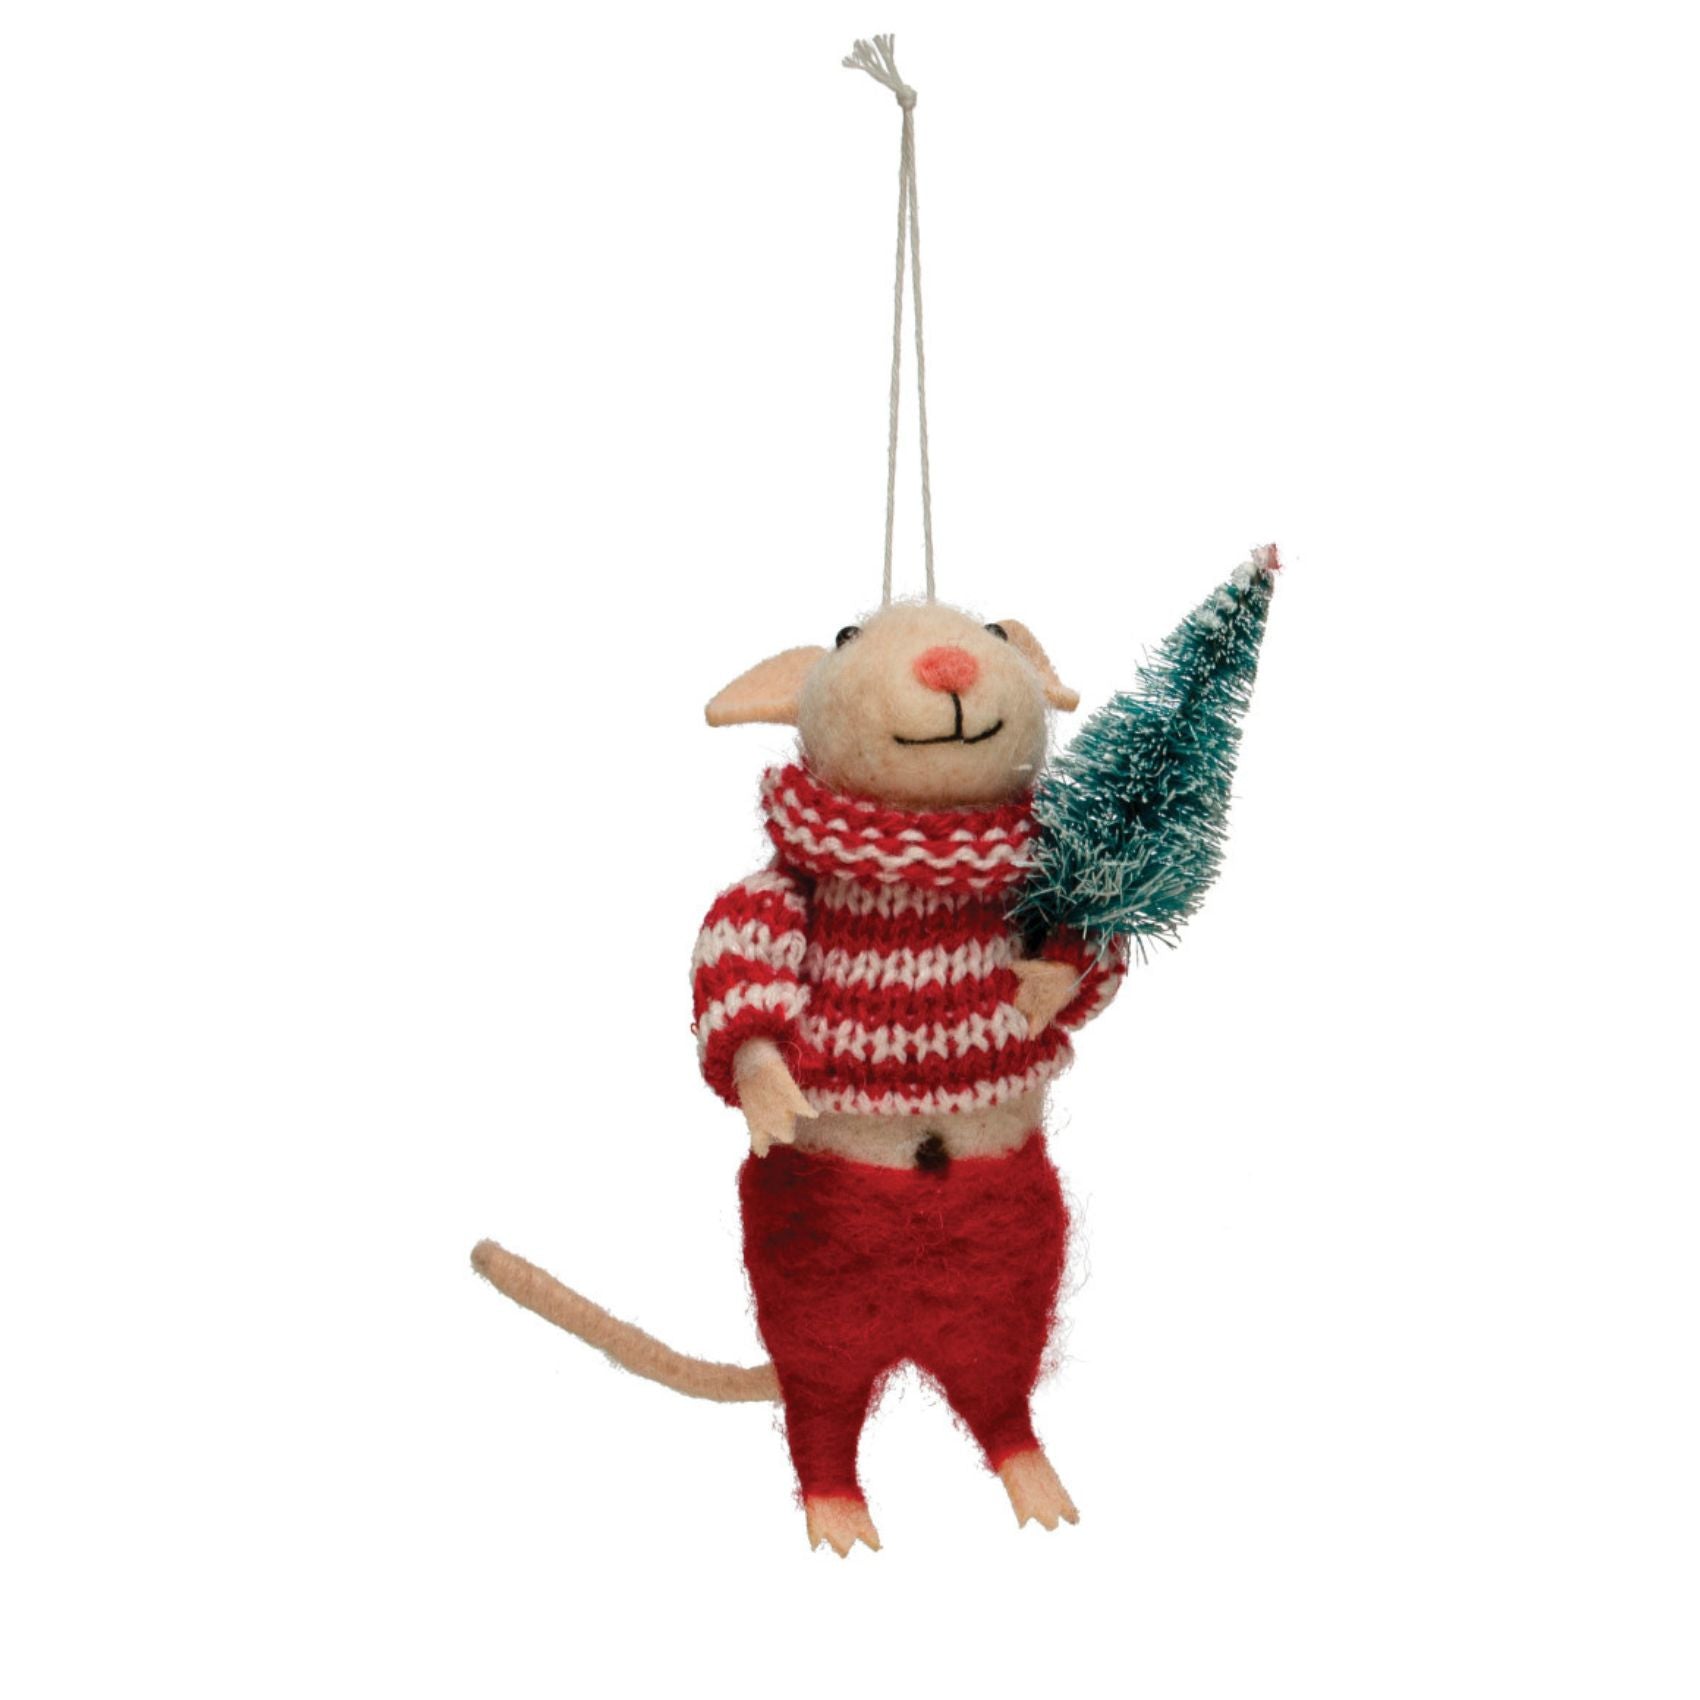 Creative Co-op Wool Felt Mouse in Outfit Ornament - Red and White Stripe Sweater with Tree